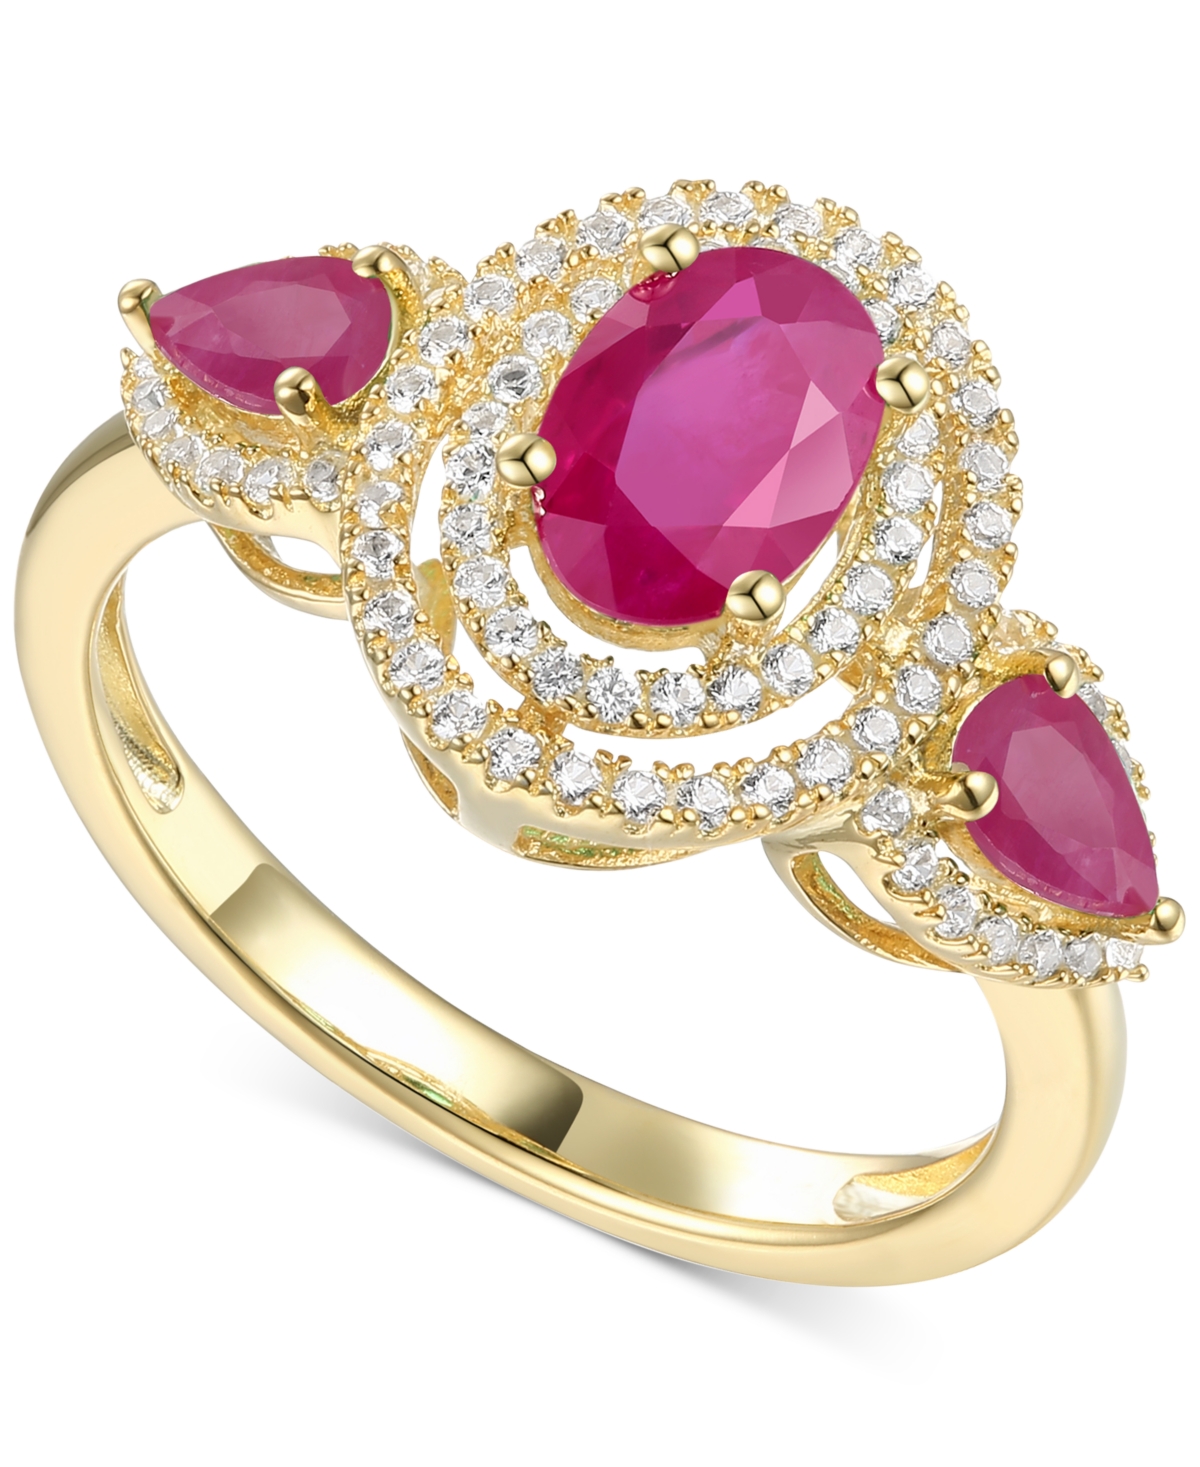 Sapphire (1-1/2 ct. t.w.) & Diamond (1/3 ct. t.w.) Statement Ring in 14k Gold (Also in Ruby) - Ruby